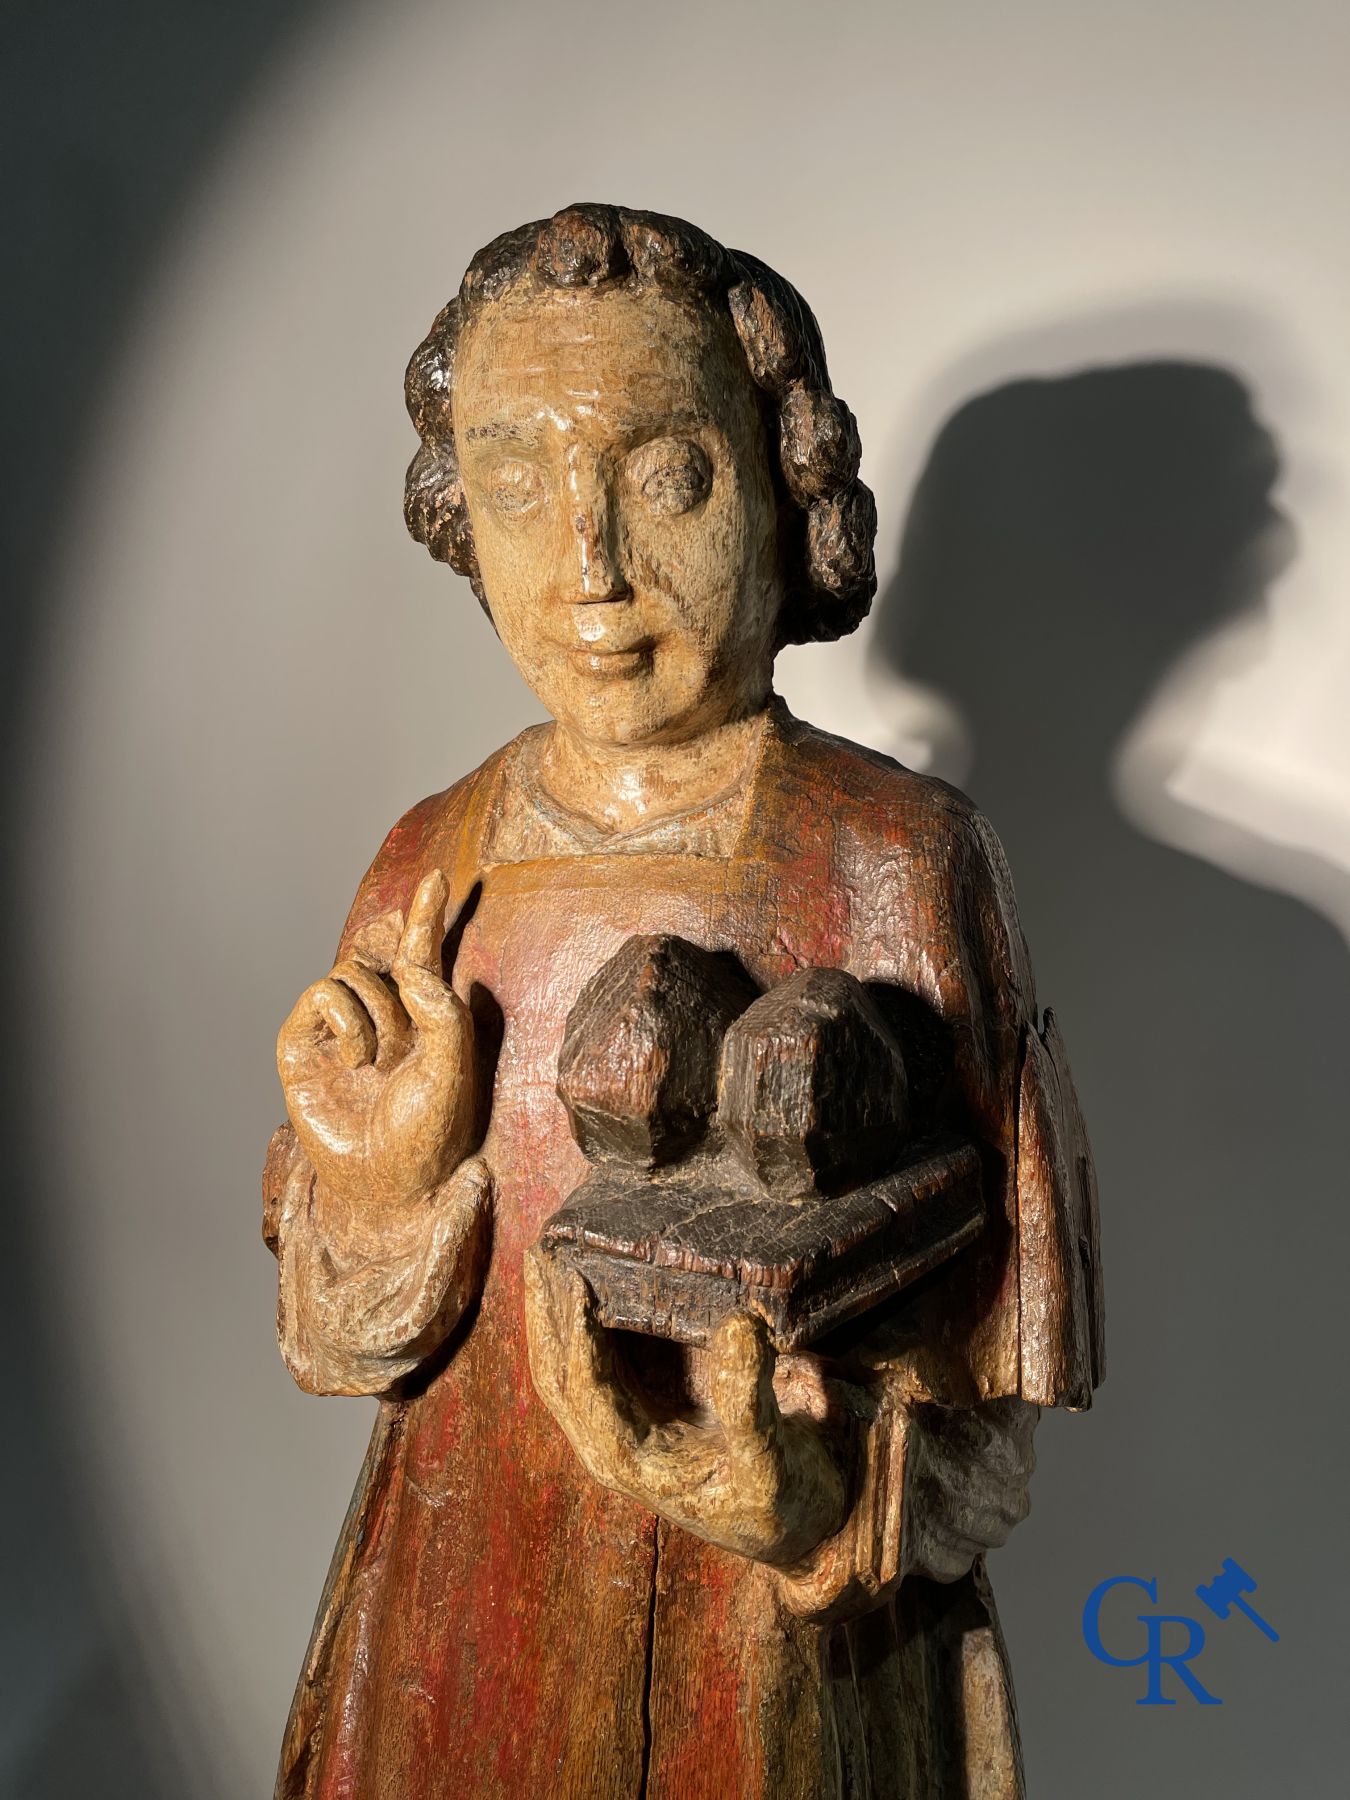 Wooden sculpture: Polychrome wood sculpture of a saint. Saint Stephen. Probably 17th century. - Image 10 of 26